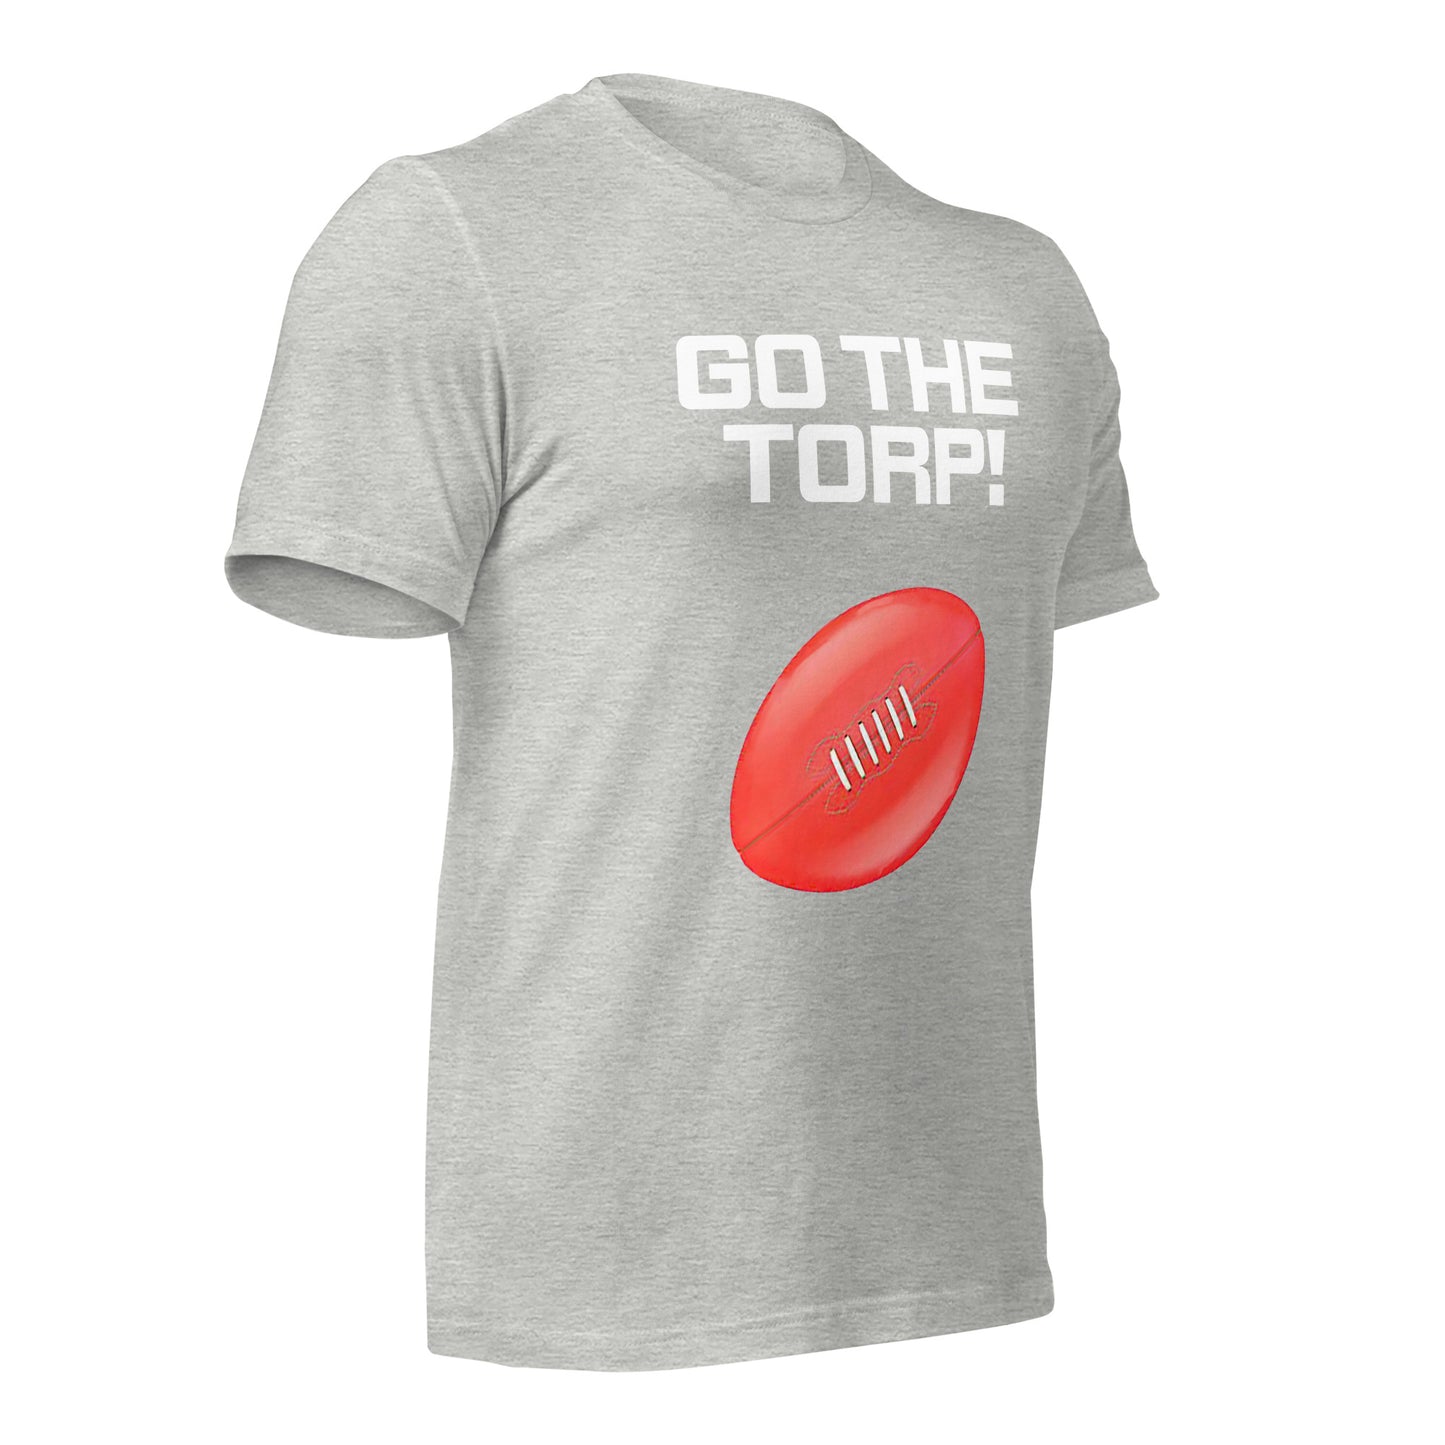 Go the Torp!